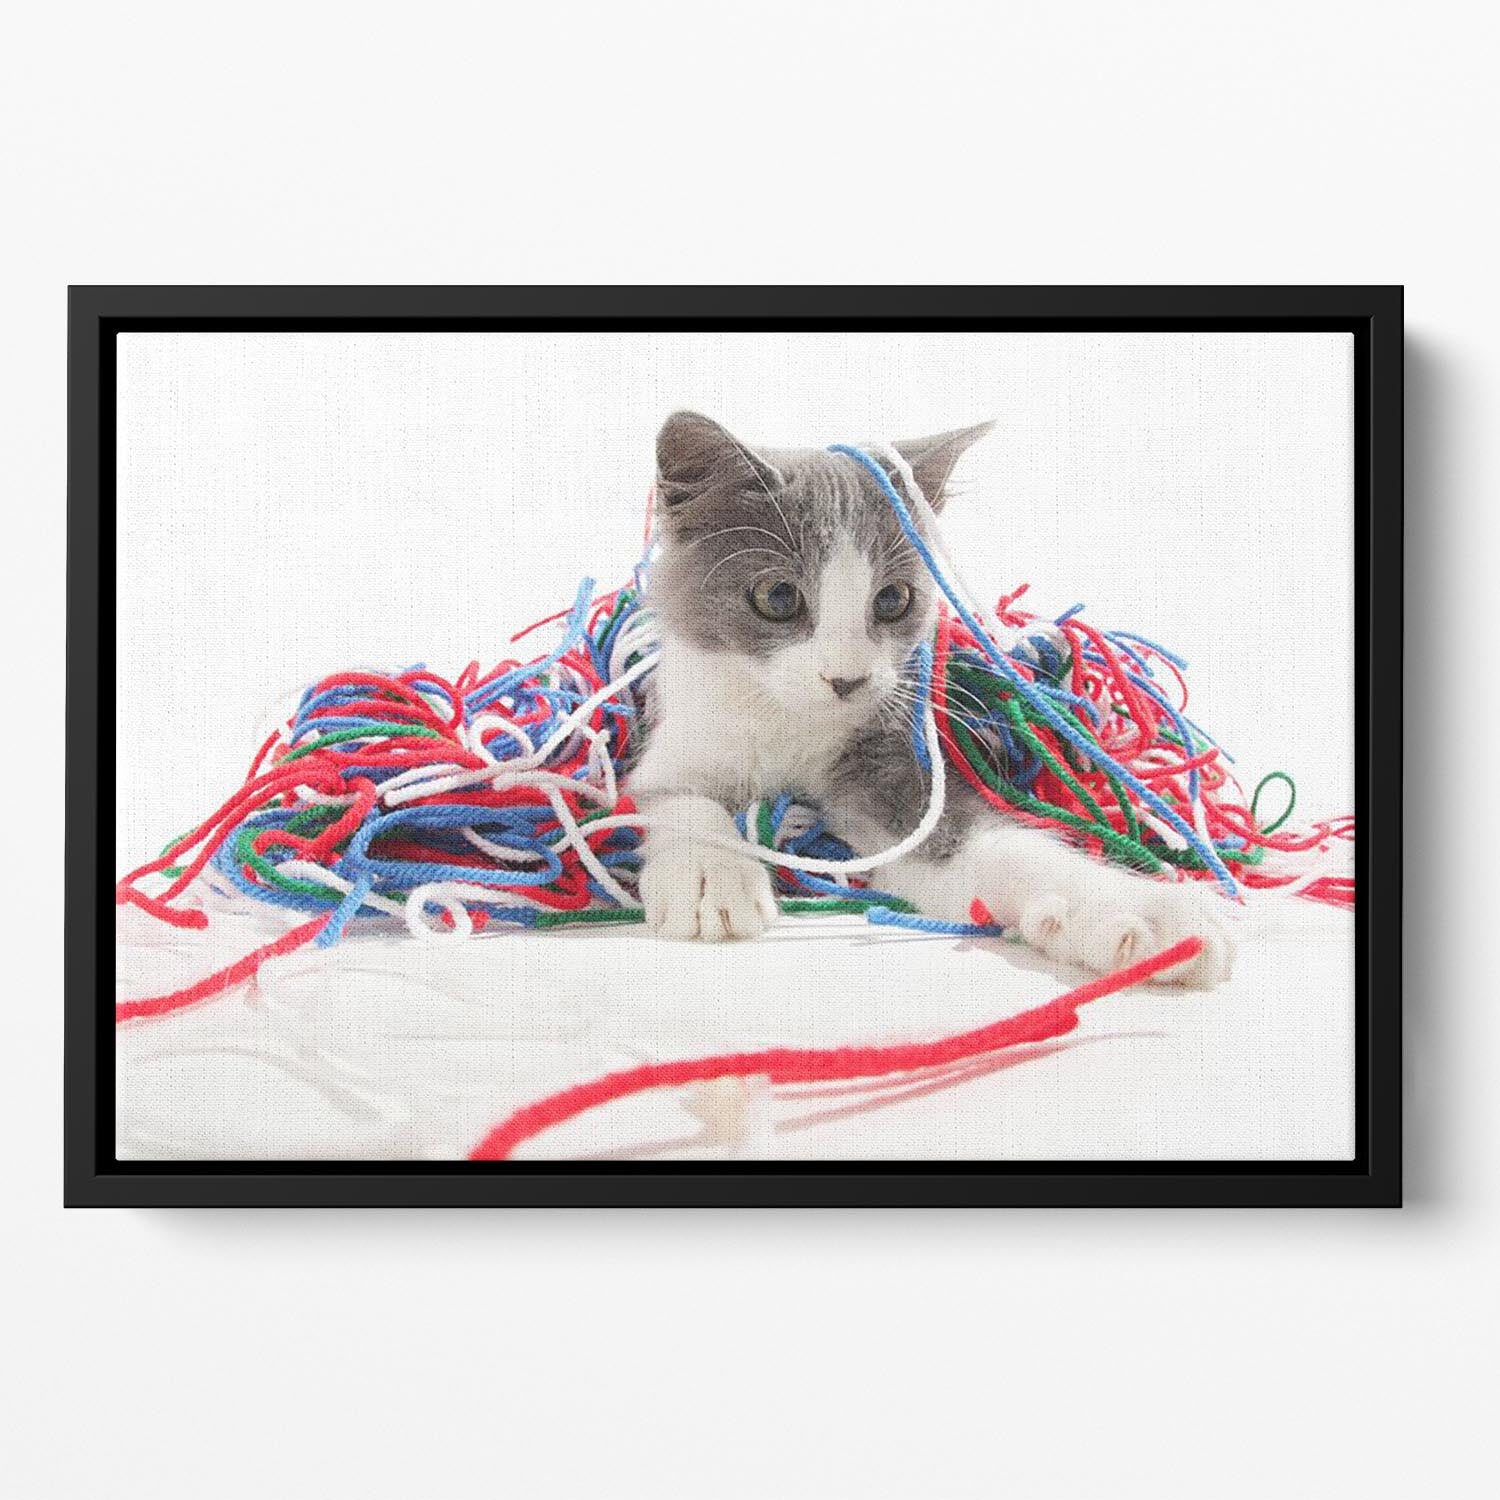 Kitten playing with yarn Floating Framed Canvas - Canvas Art Rocks - 2